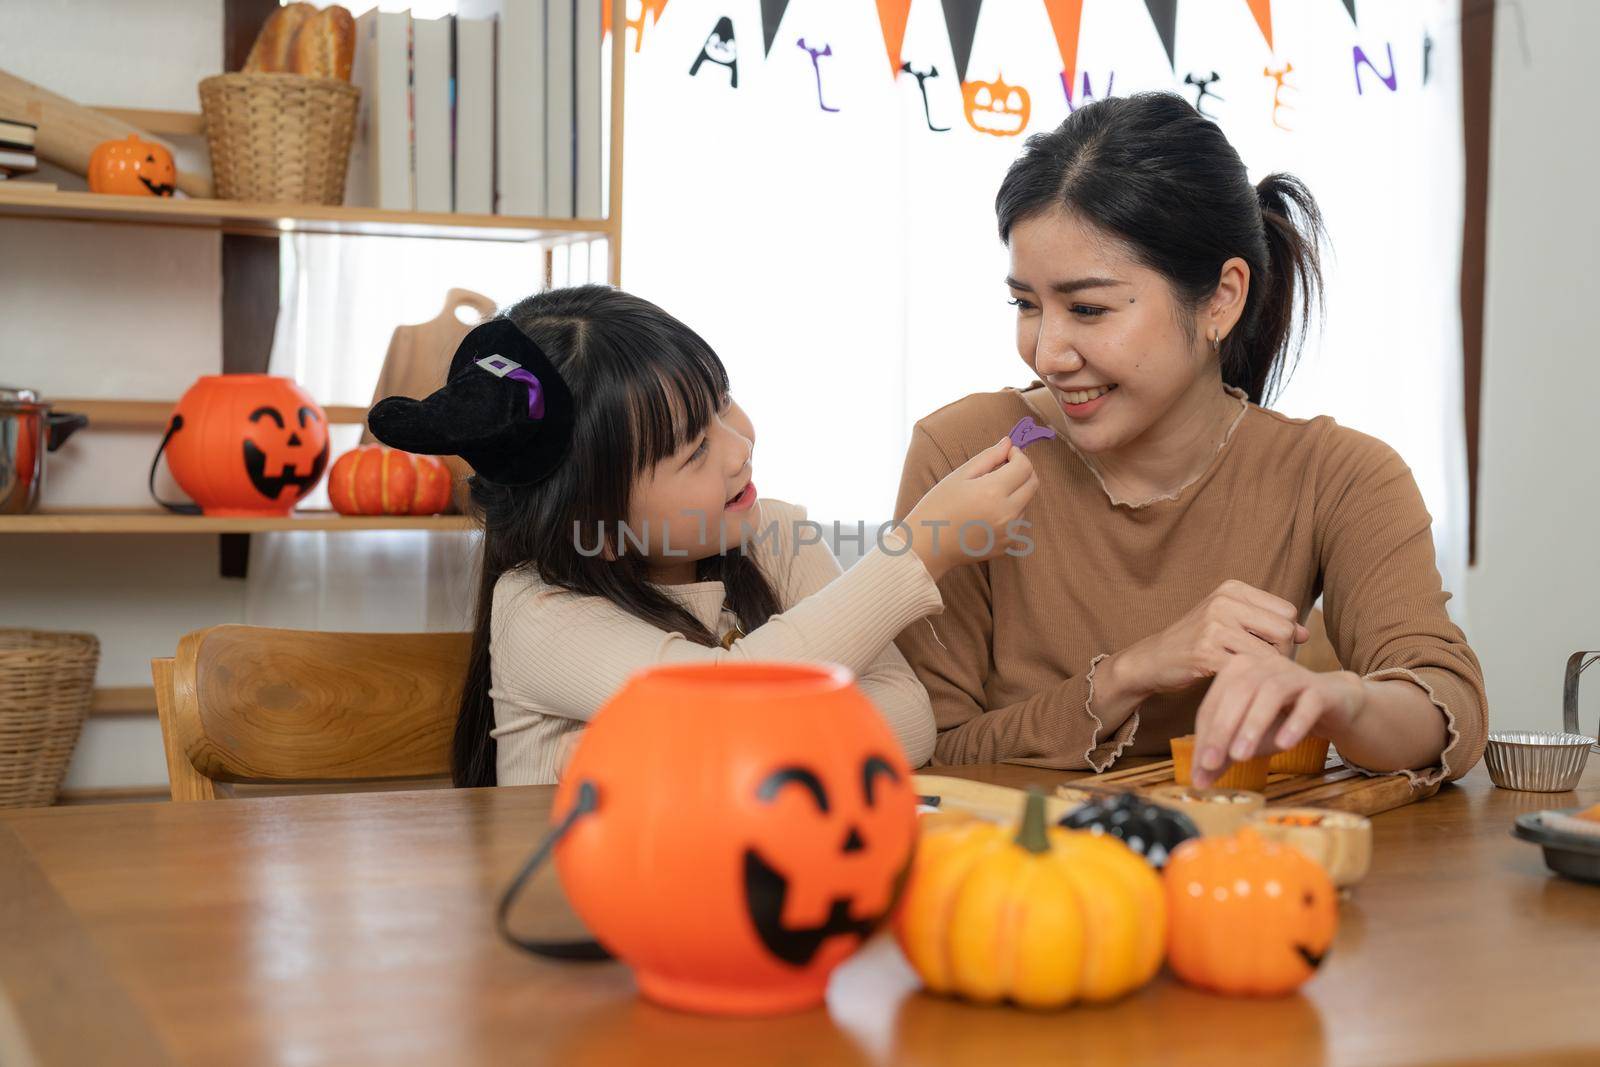 Happy smiling family mother and daughter making Halloween home decorations together while sitting at wooden table. by nateemee